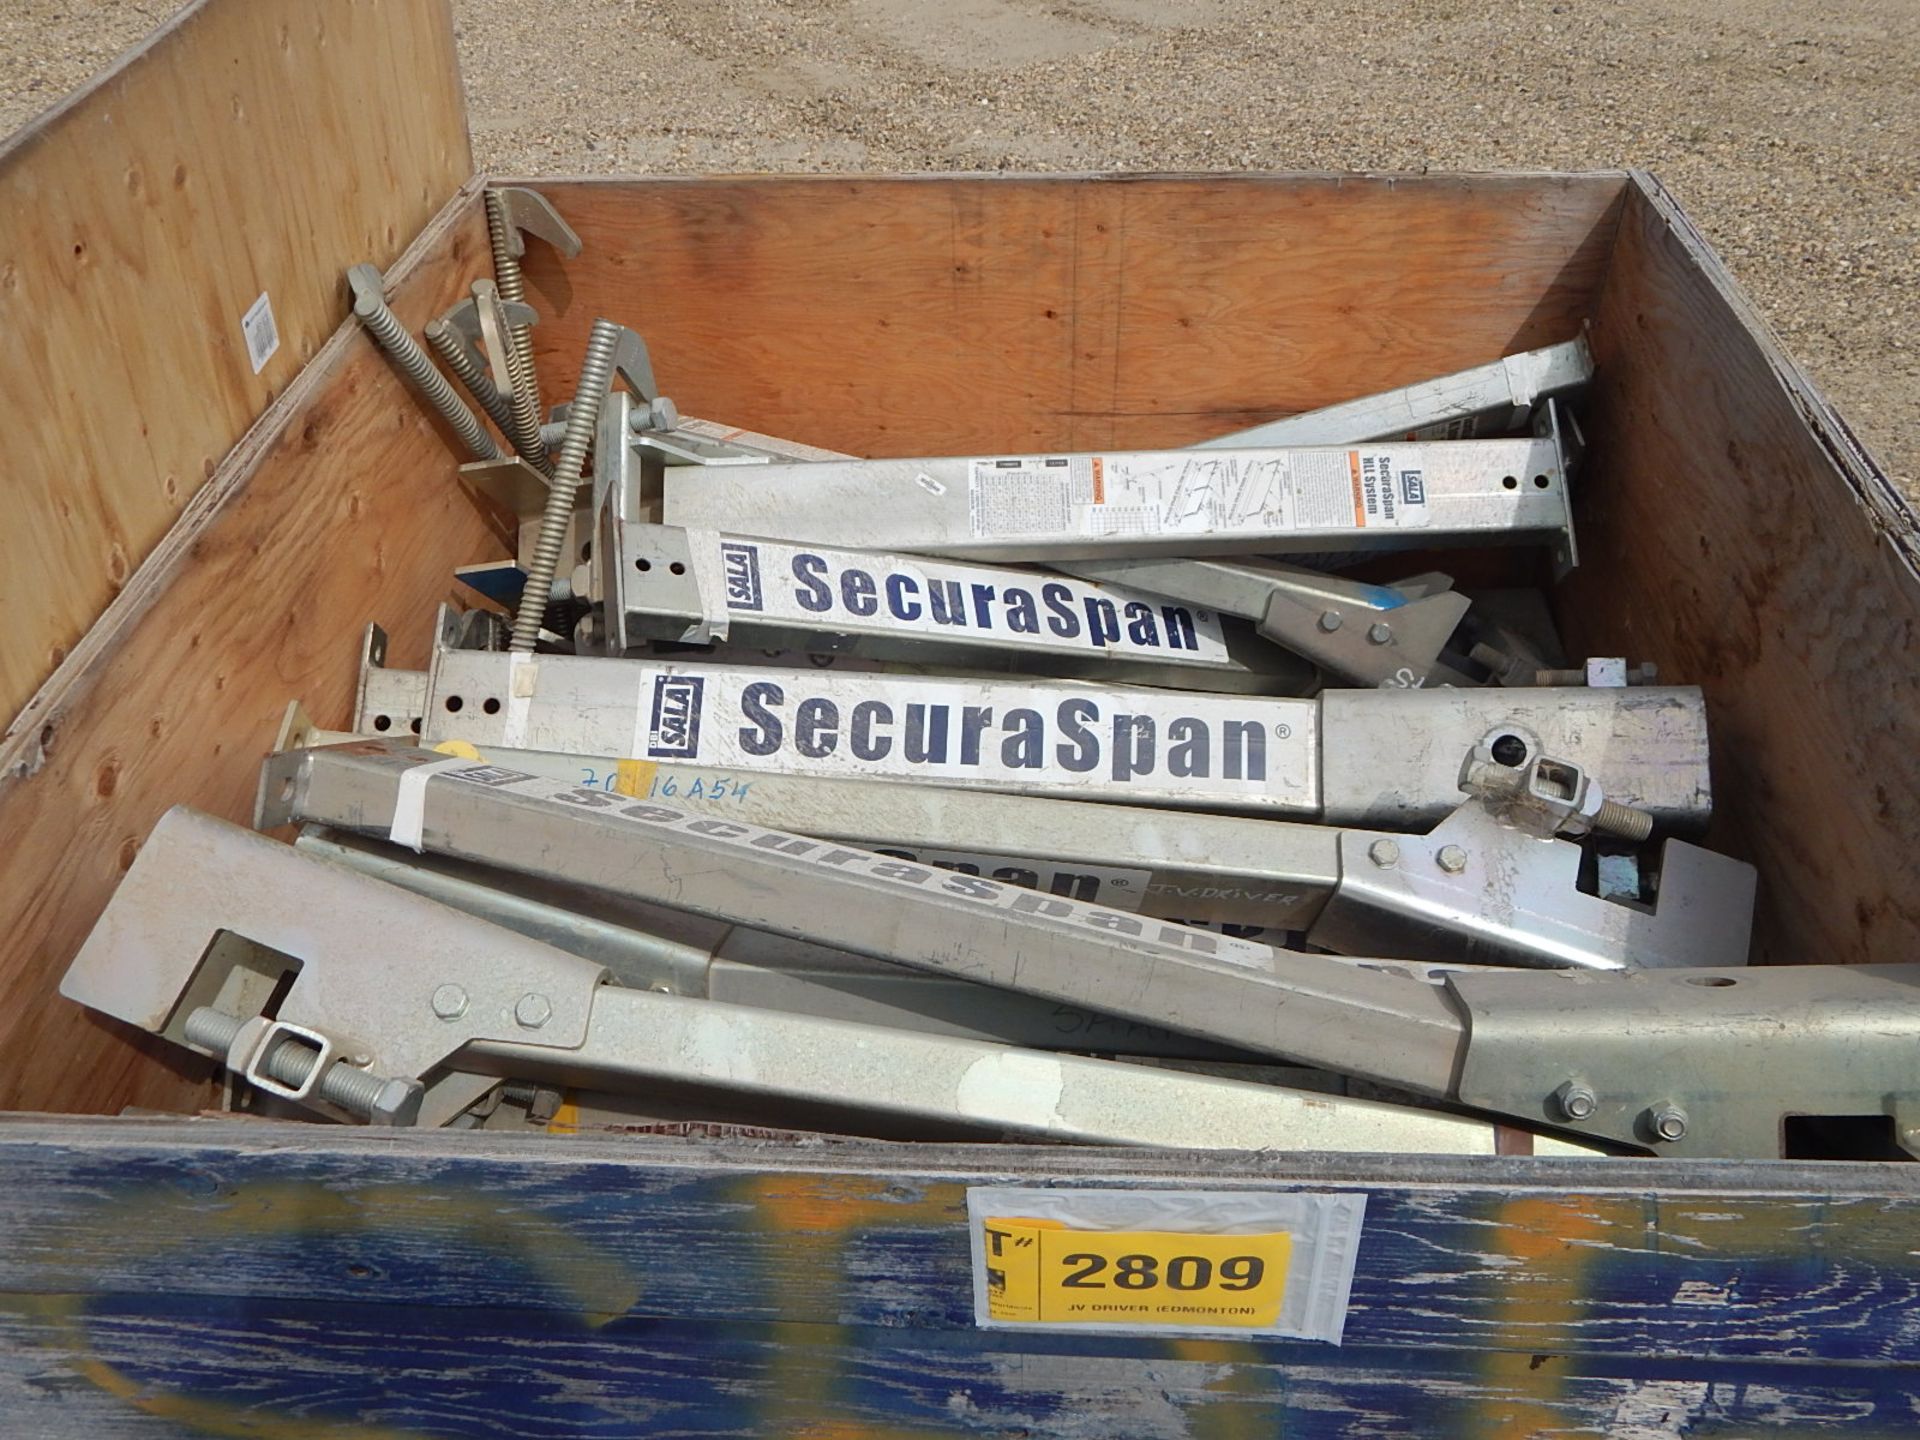 LOT/ CONTENTS OF CRATE CONSISTING OF SALA HLL SECURASPAN STANCHIONS